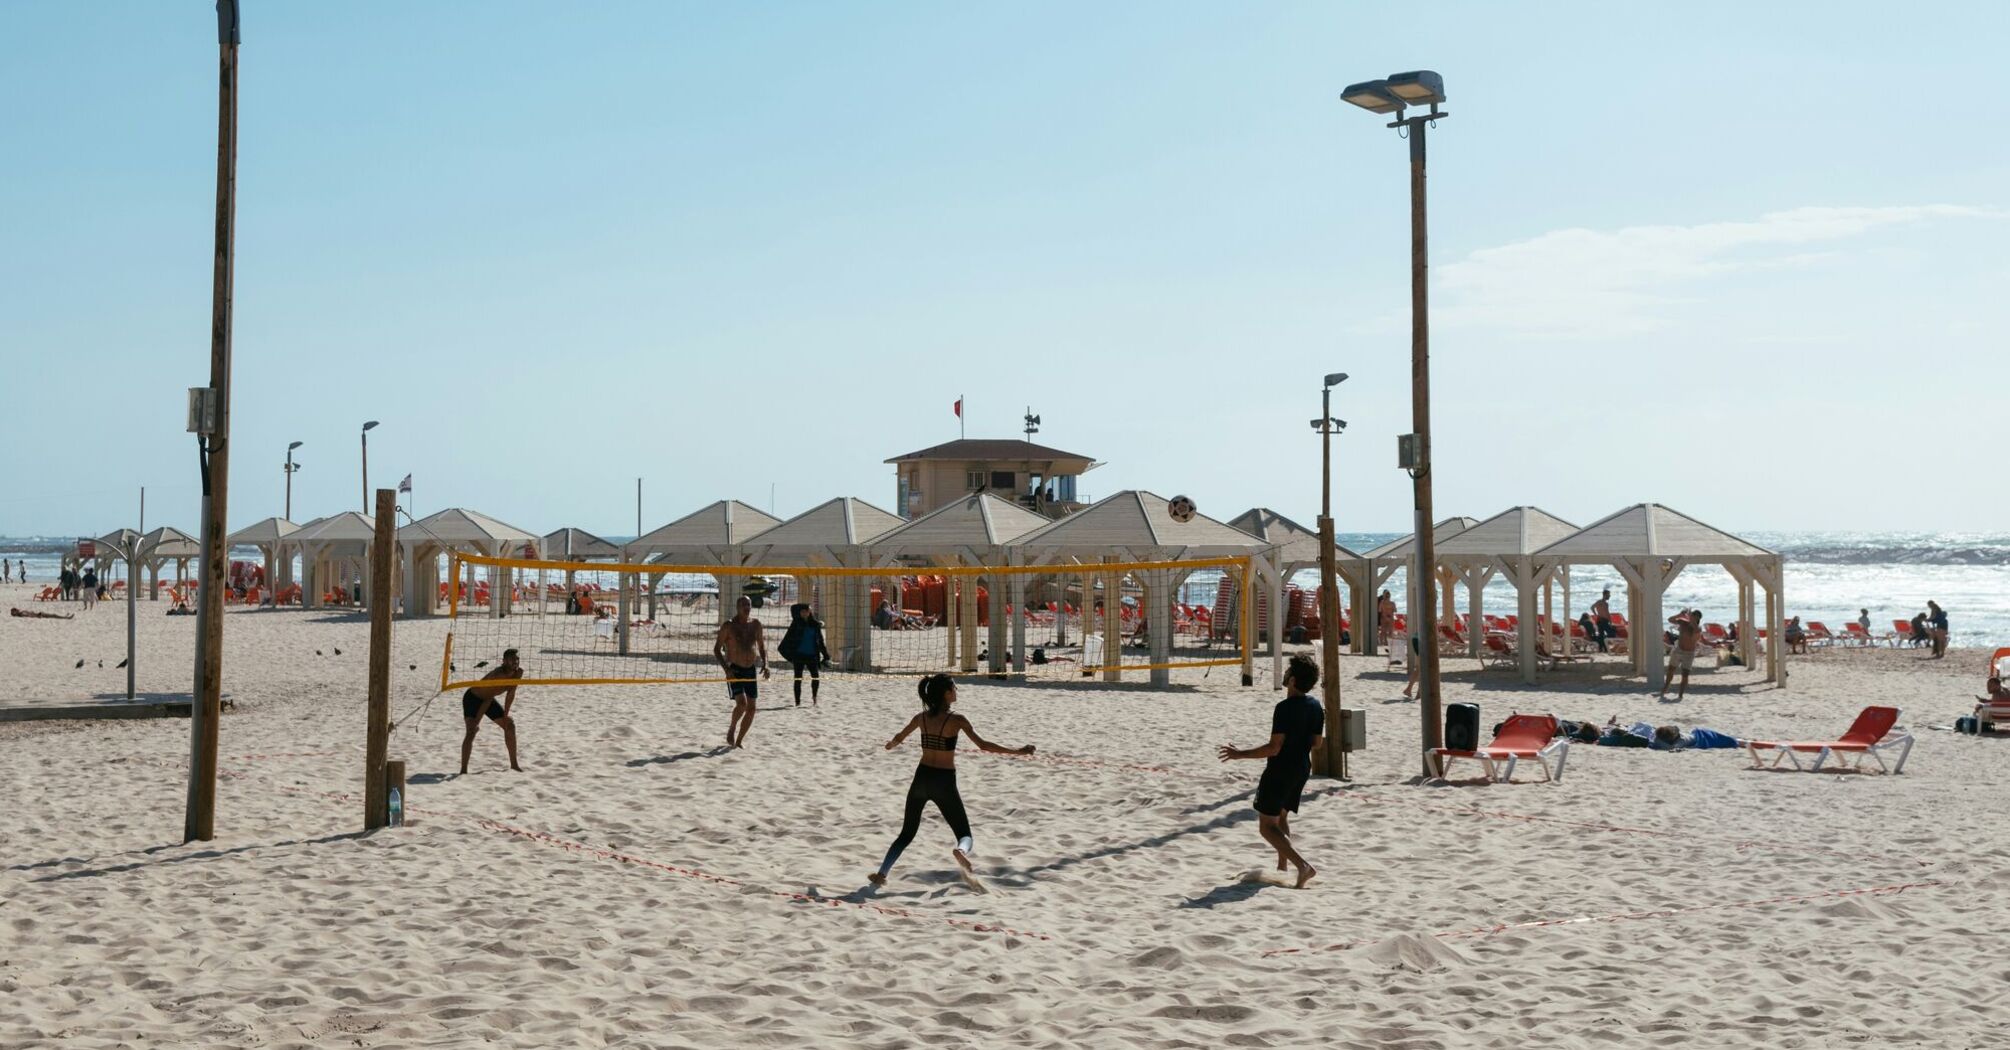 A sunny beach scene with people playing volleyball